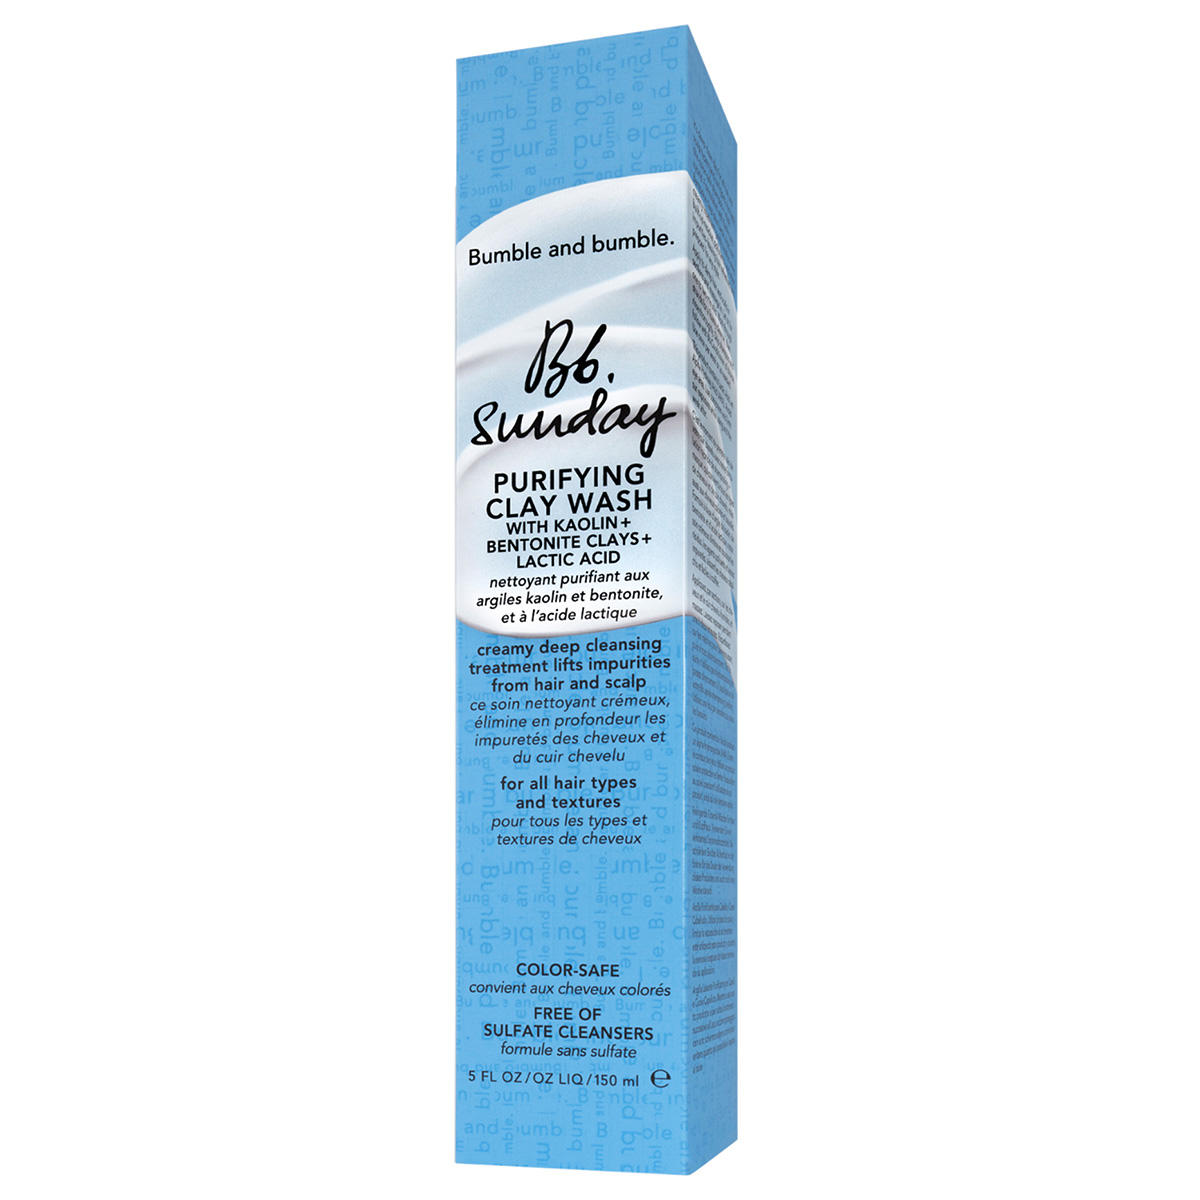 Bumble and bumble Sunday Purifying Clay Wash 150 ml - 3